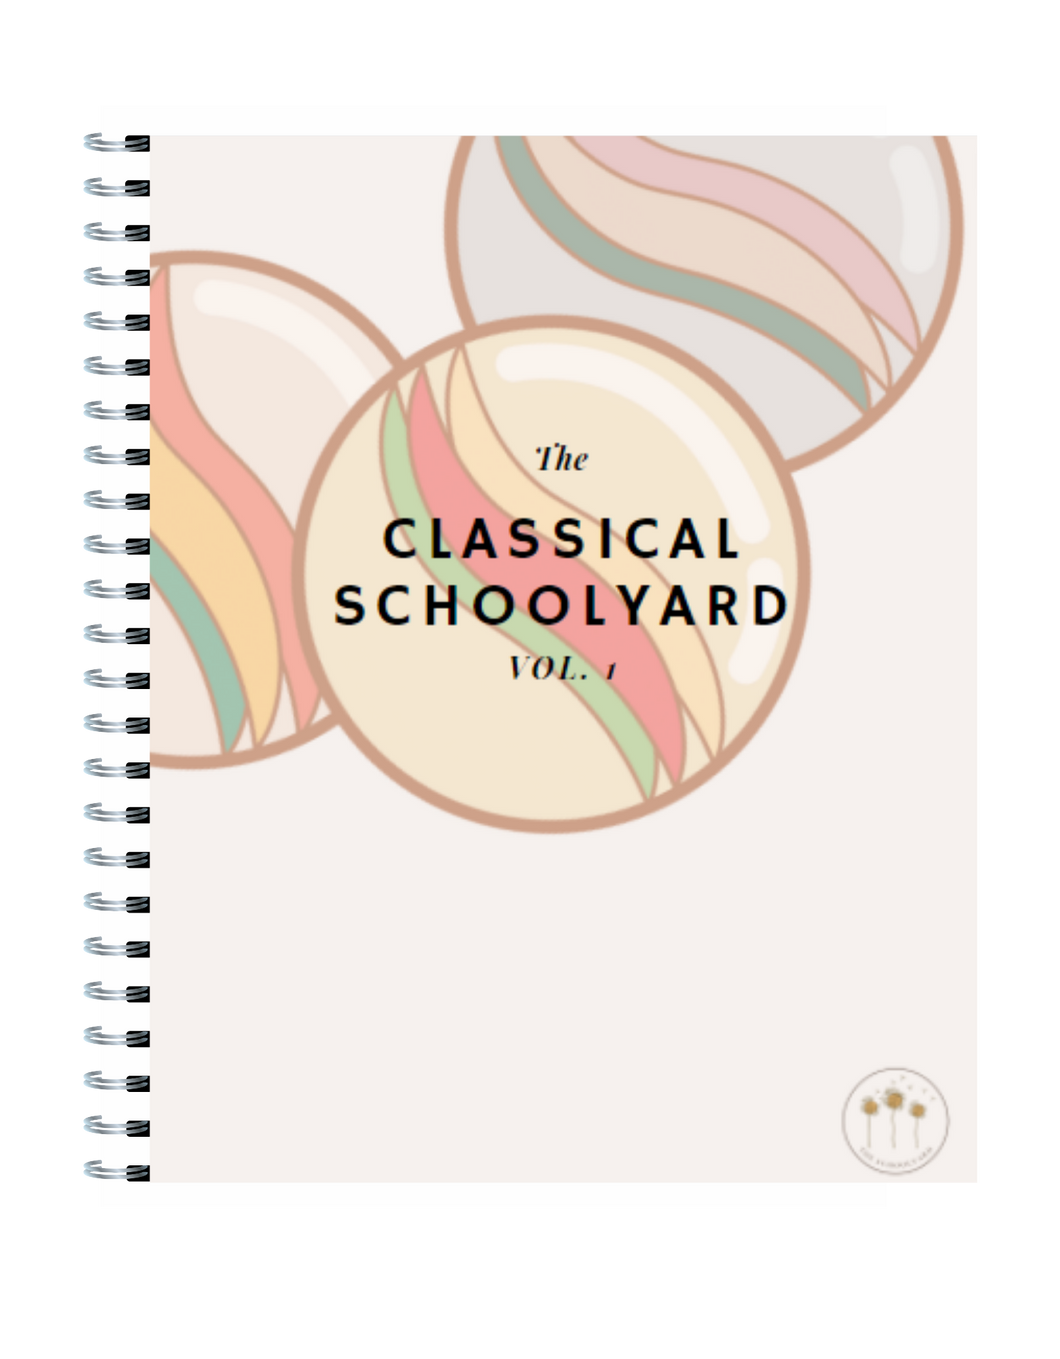 The Classical Schoolyard